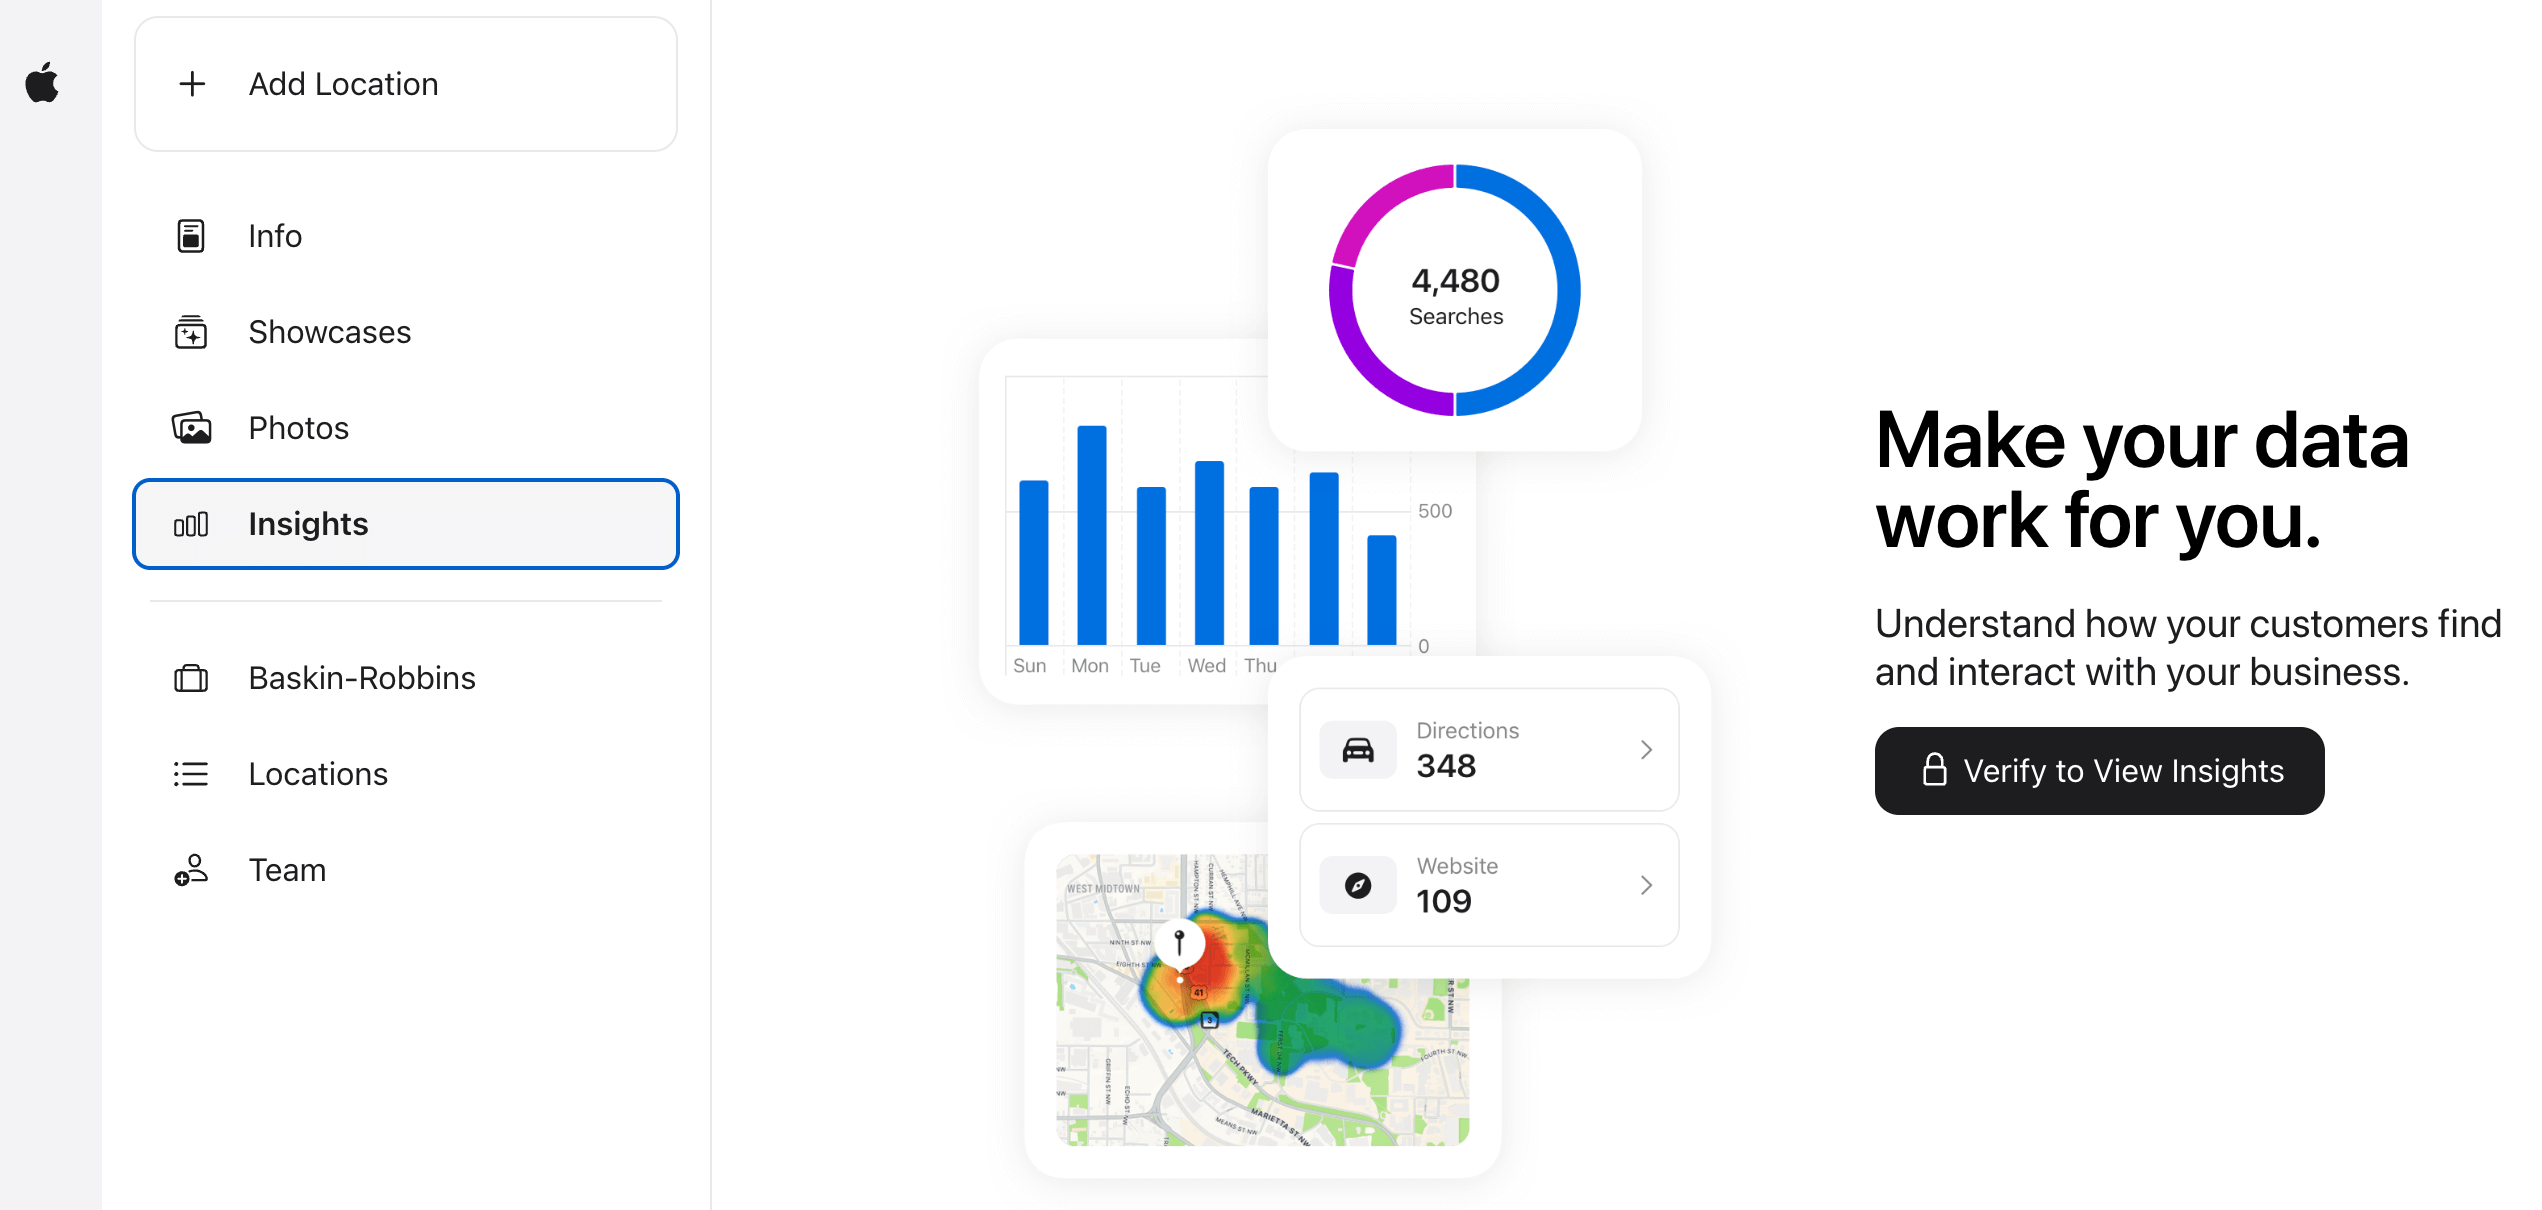 Make your data work for you with Apple Business Connect by using the Insights tab.